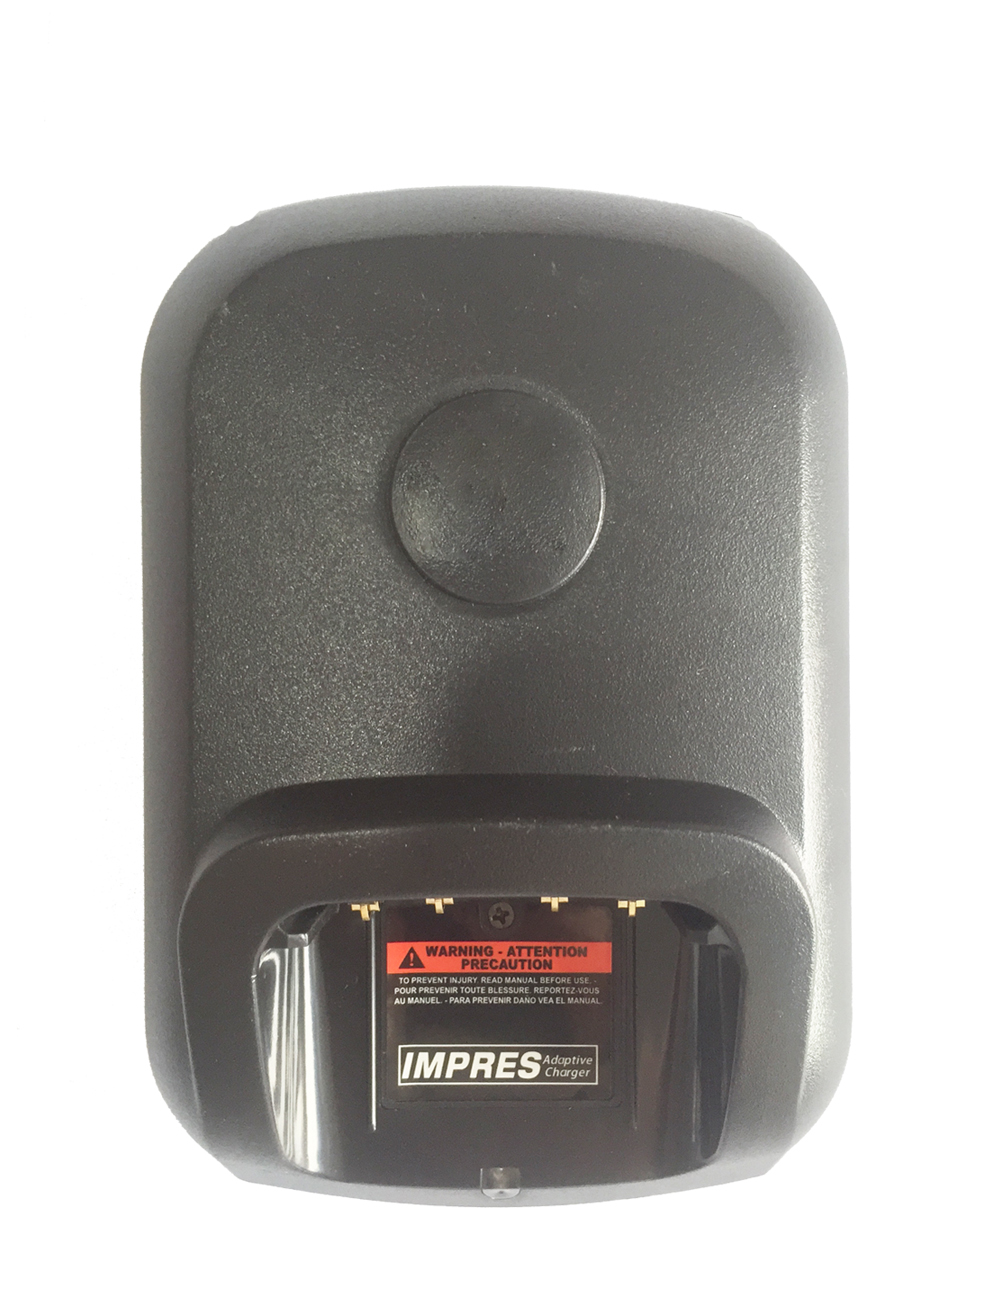 Intelligent Rapid Battery charger and Adapter WPLN4226A for Motorola walkie talkie